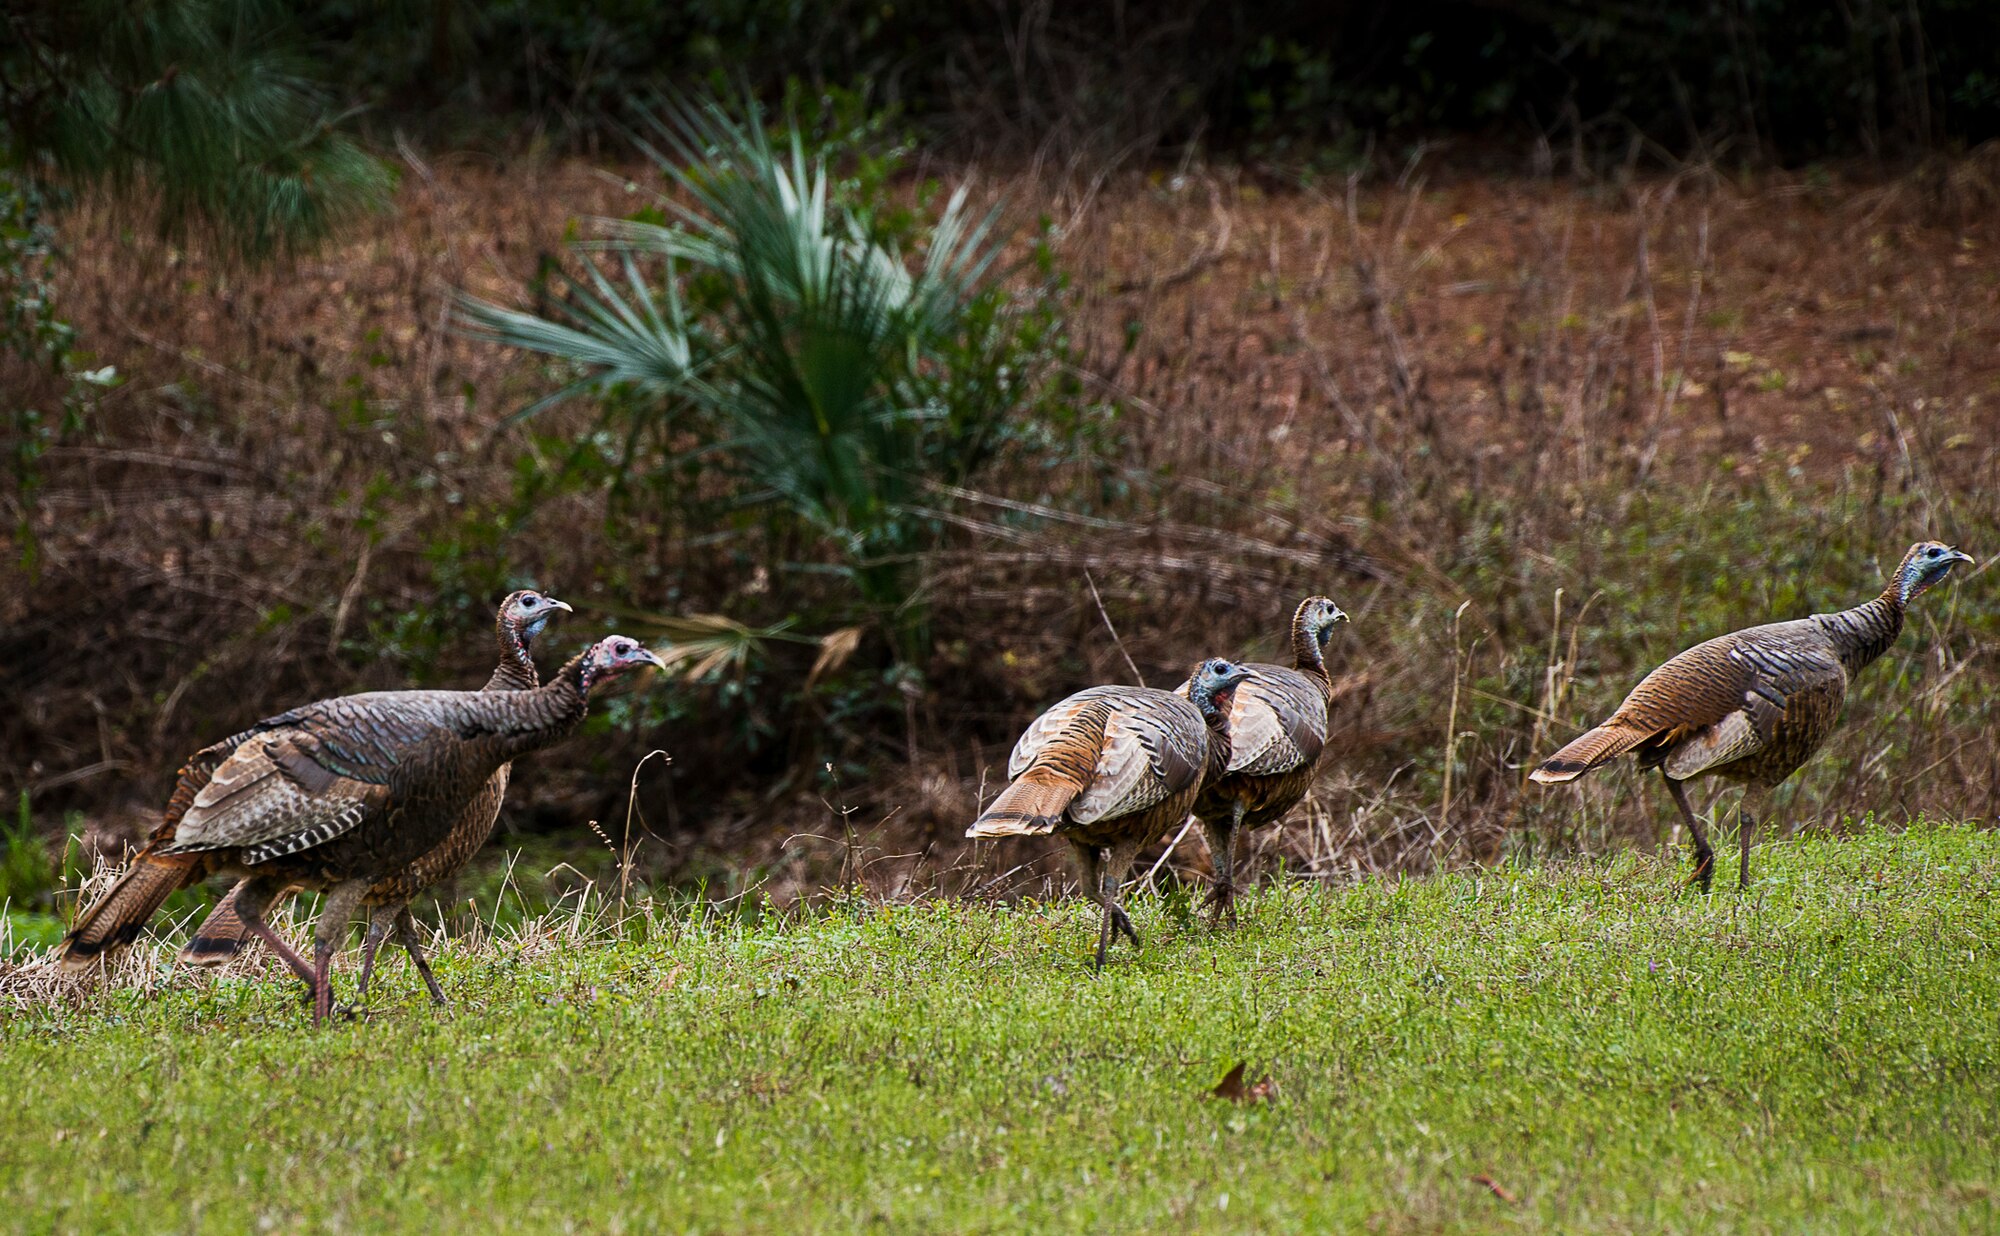 A group of approximately 13 wild turkeys were spotted along Eglin Boulevard March 7 at Eglin Air Force Base, Fla. Spring brings these normally reclusive birds out into the open to feed on new vegetative growth and insects. The Eglin reservation has a sizable wild turkey population including a growing number on the main base. For more information on wild turkeys or the upcoming turkey seasons, call Jackson Guard at 882-4165 or 4166. (U.S. Air Force photo/Samuel King Jr.)